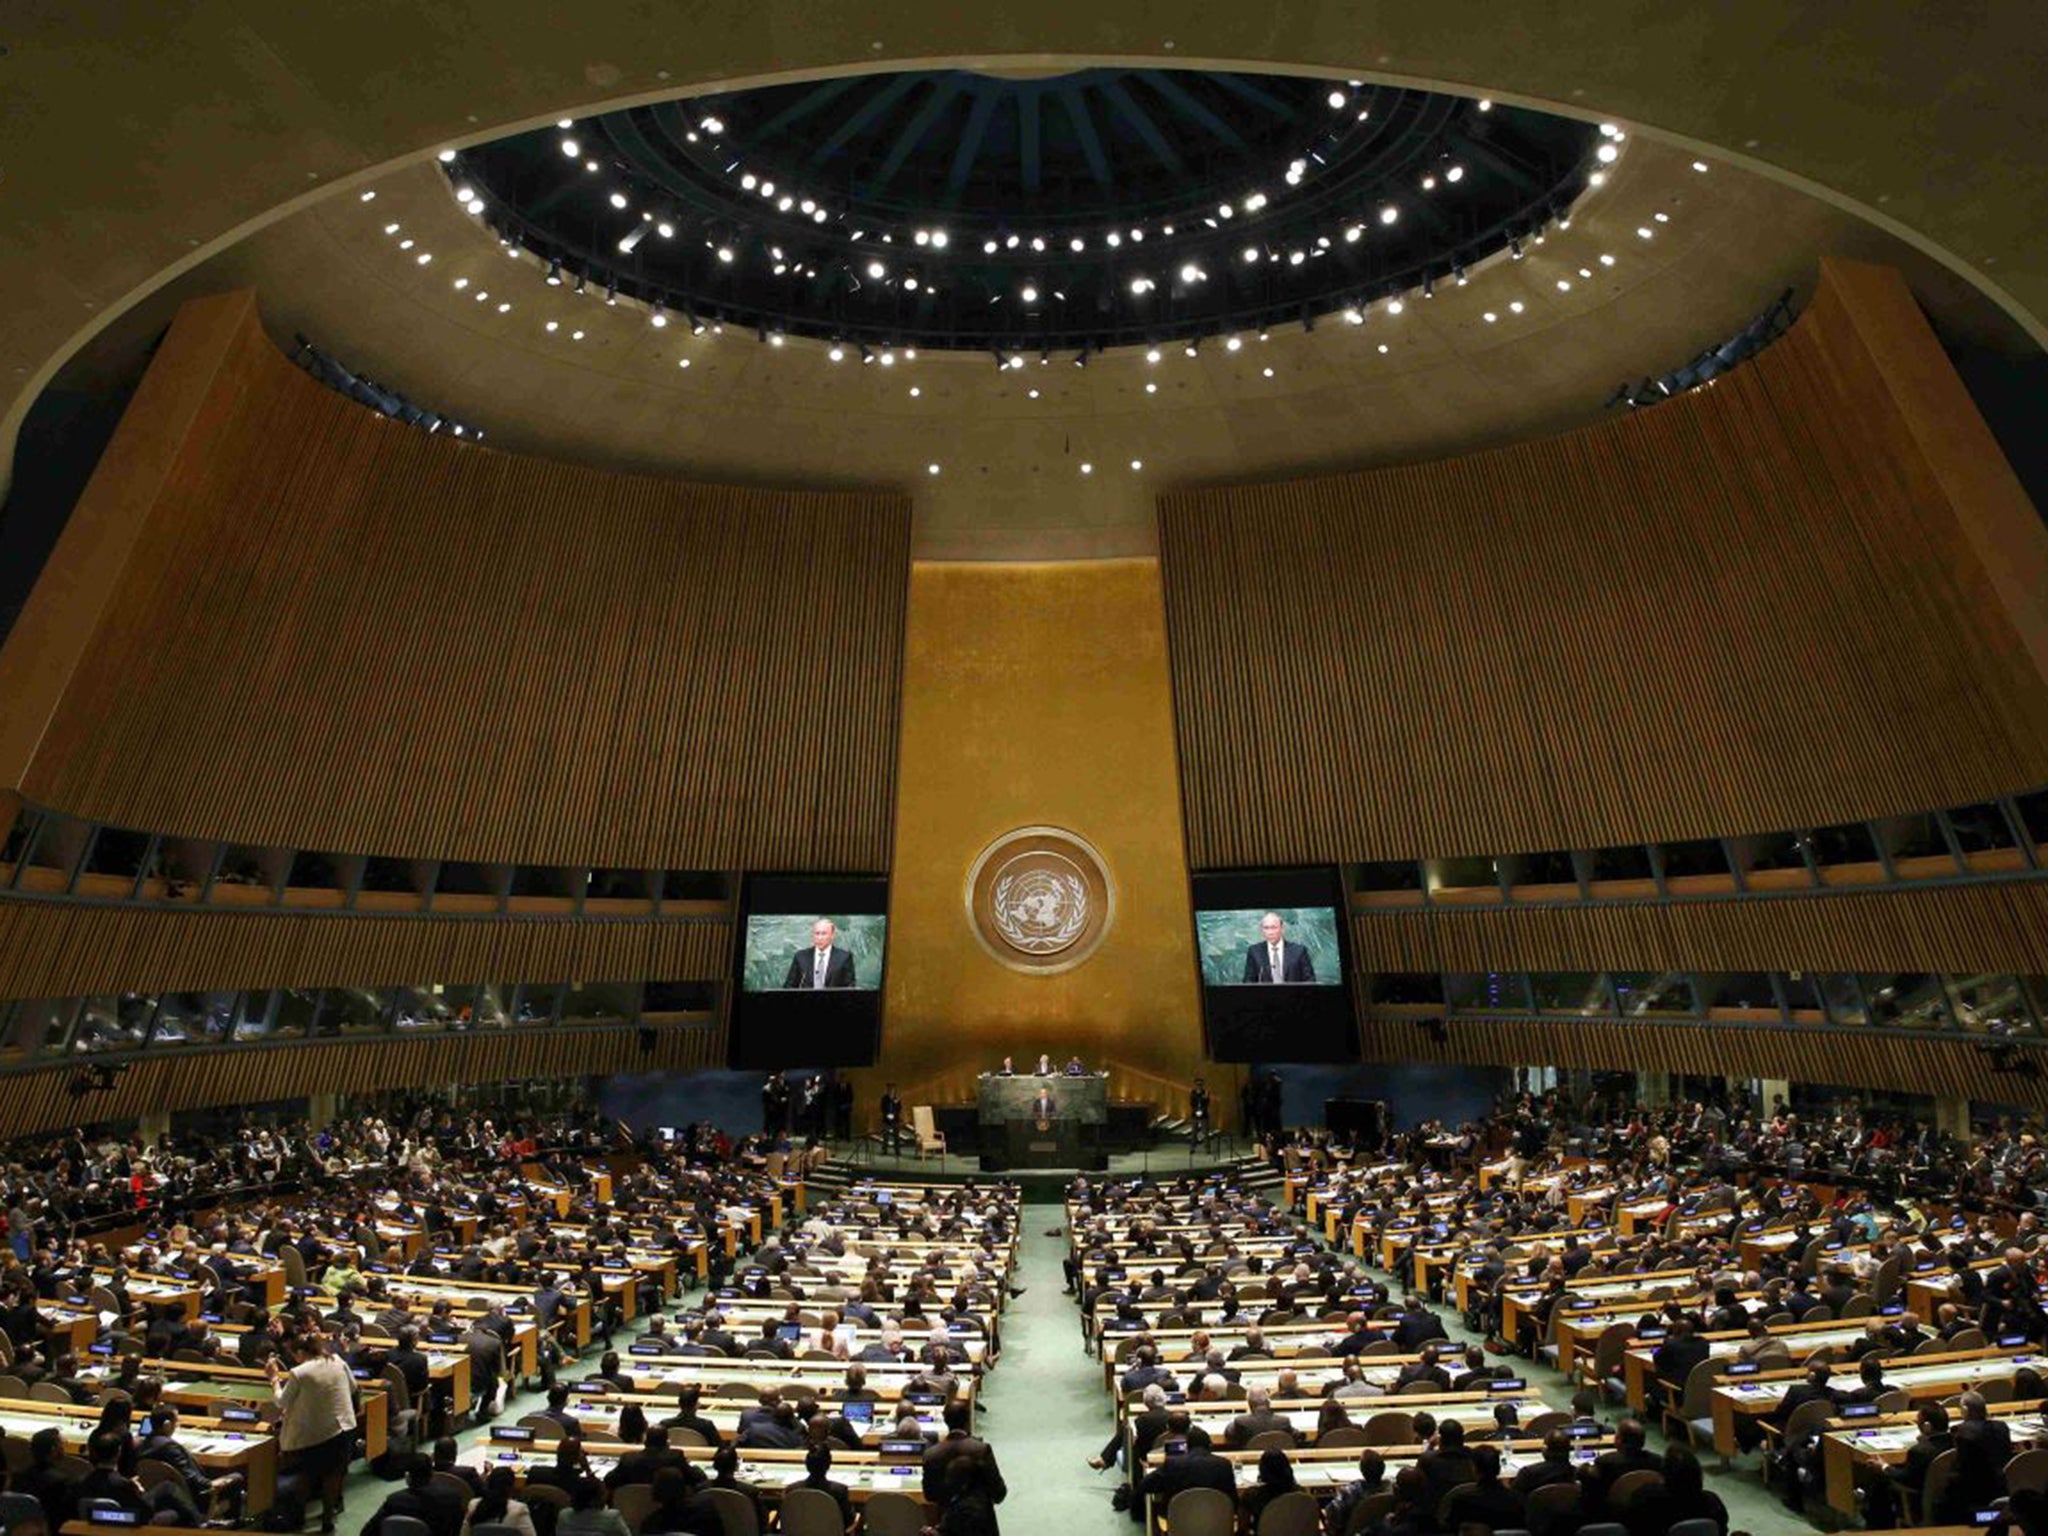 Vladimir Putin delivers his address to the UN General Assembly in New York on Monday; after that of Barack Obama